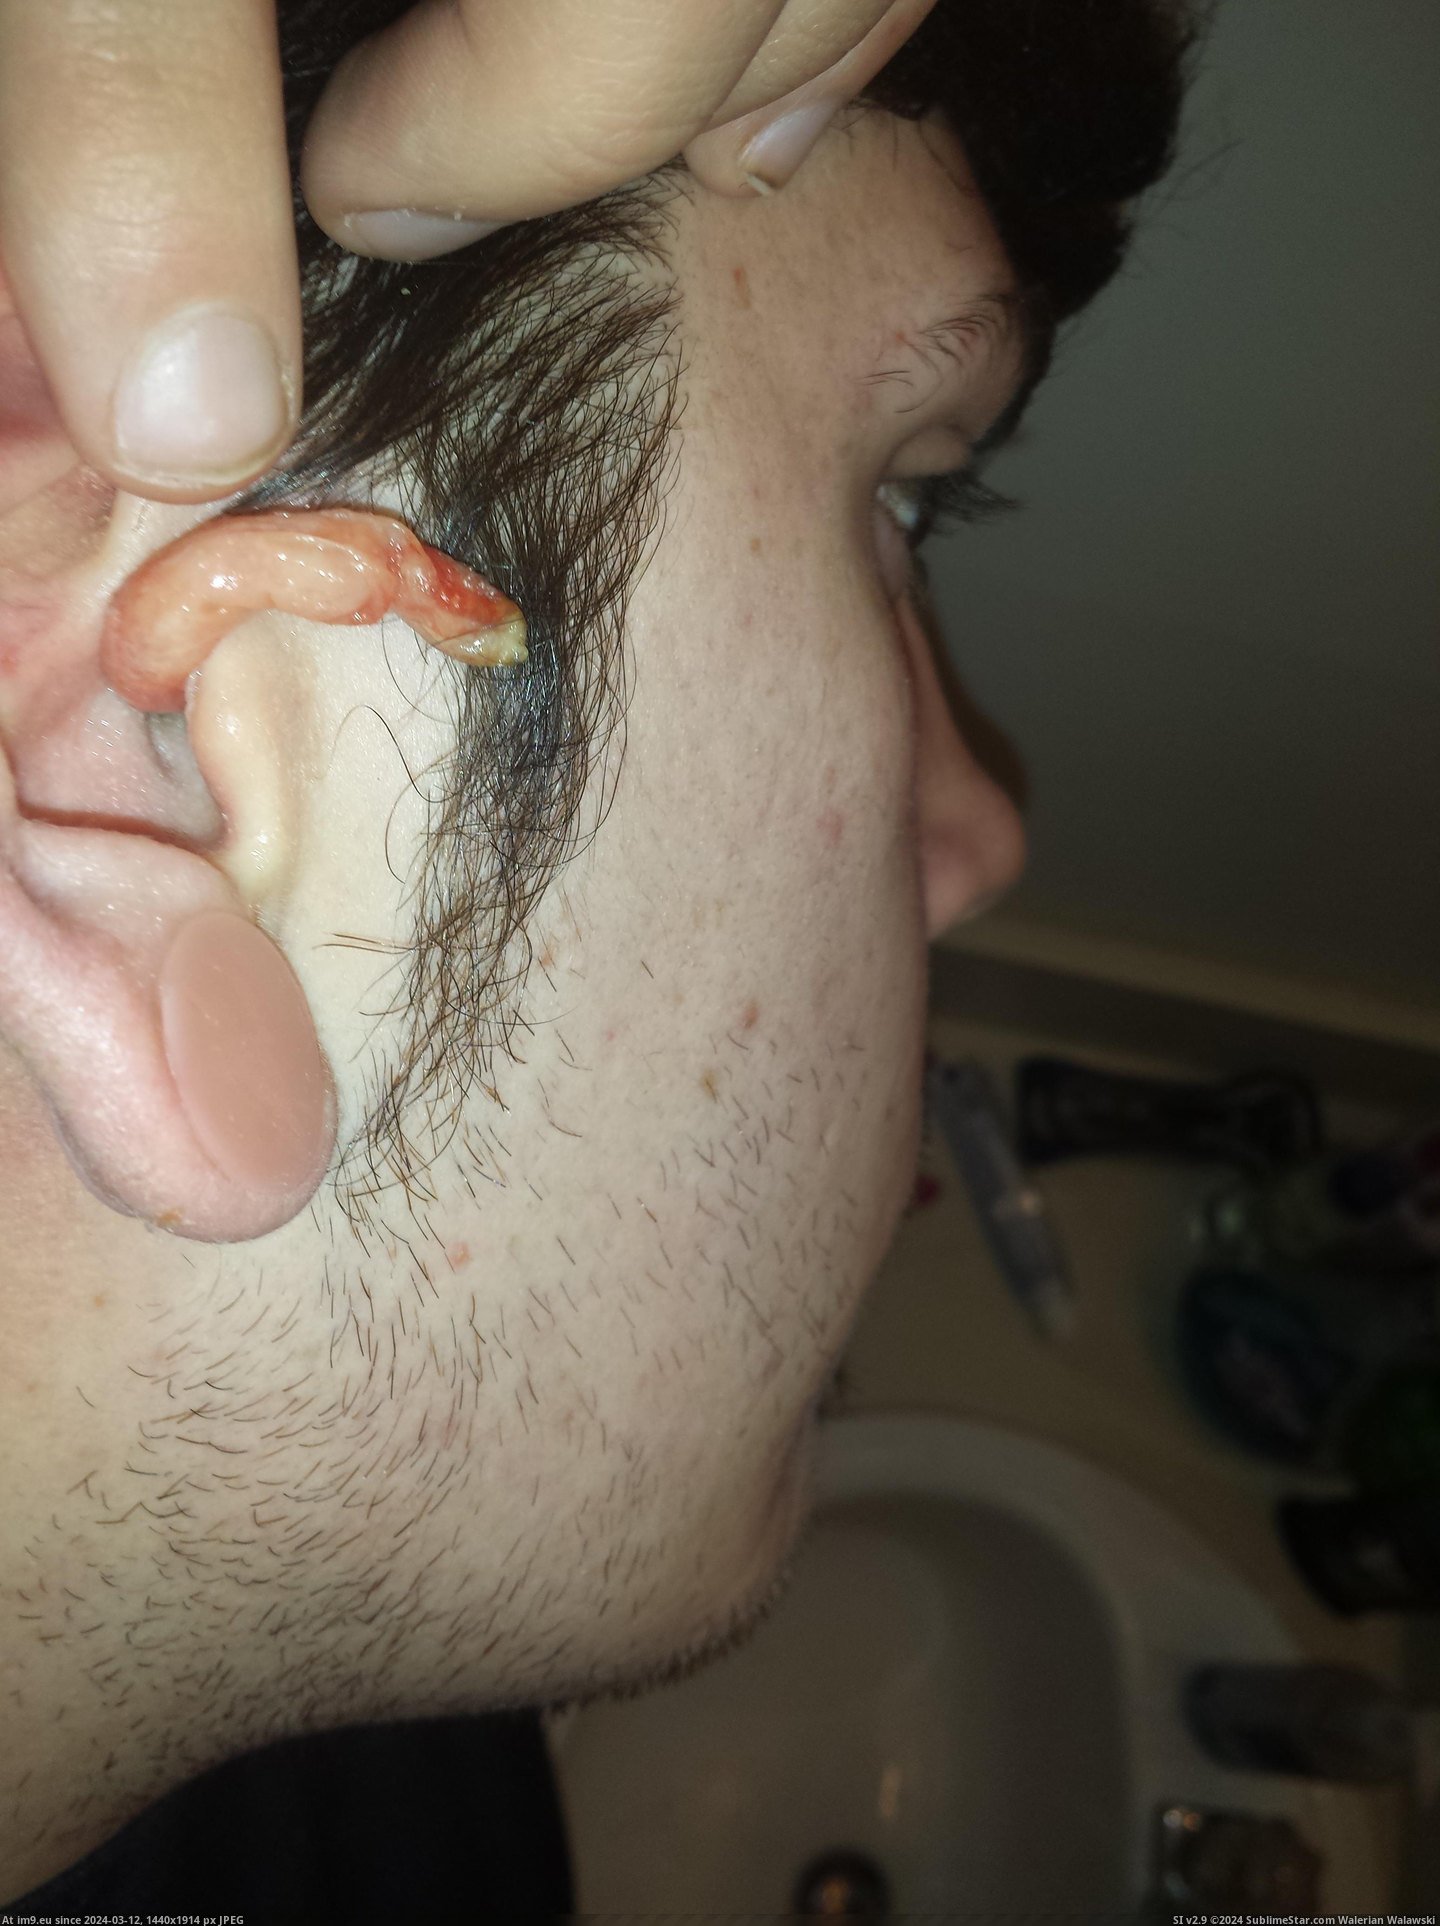 #Wtf #Ear #Infection #Crazy [Wtf] My crazy ear infection 14 Pic. (Изображение из альбом My r/WTF favs))